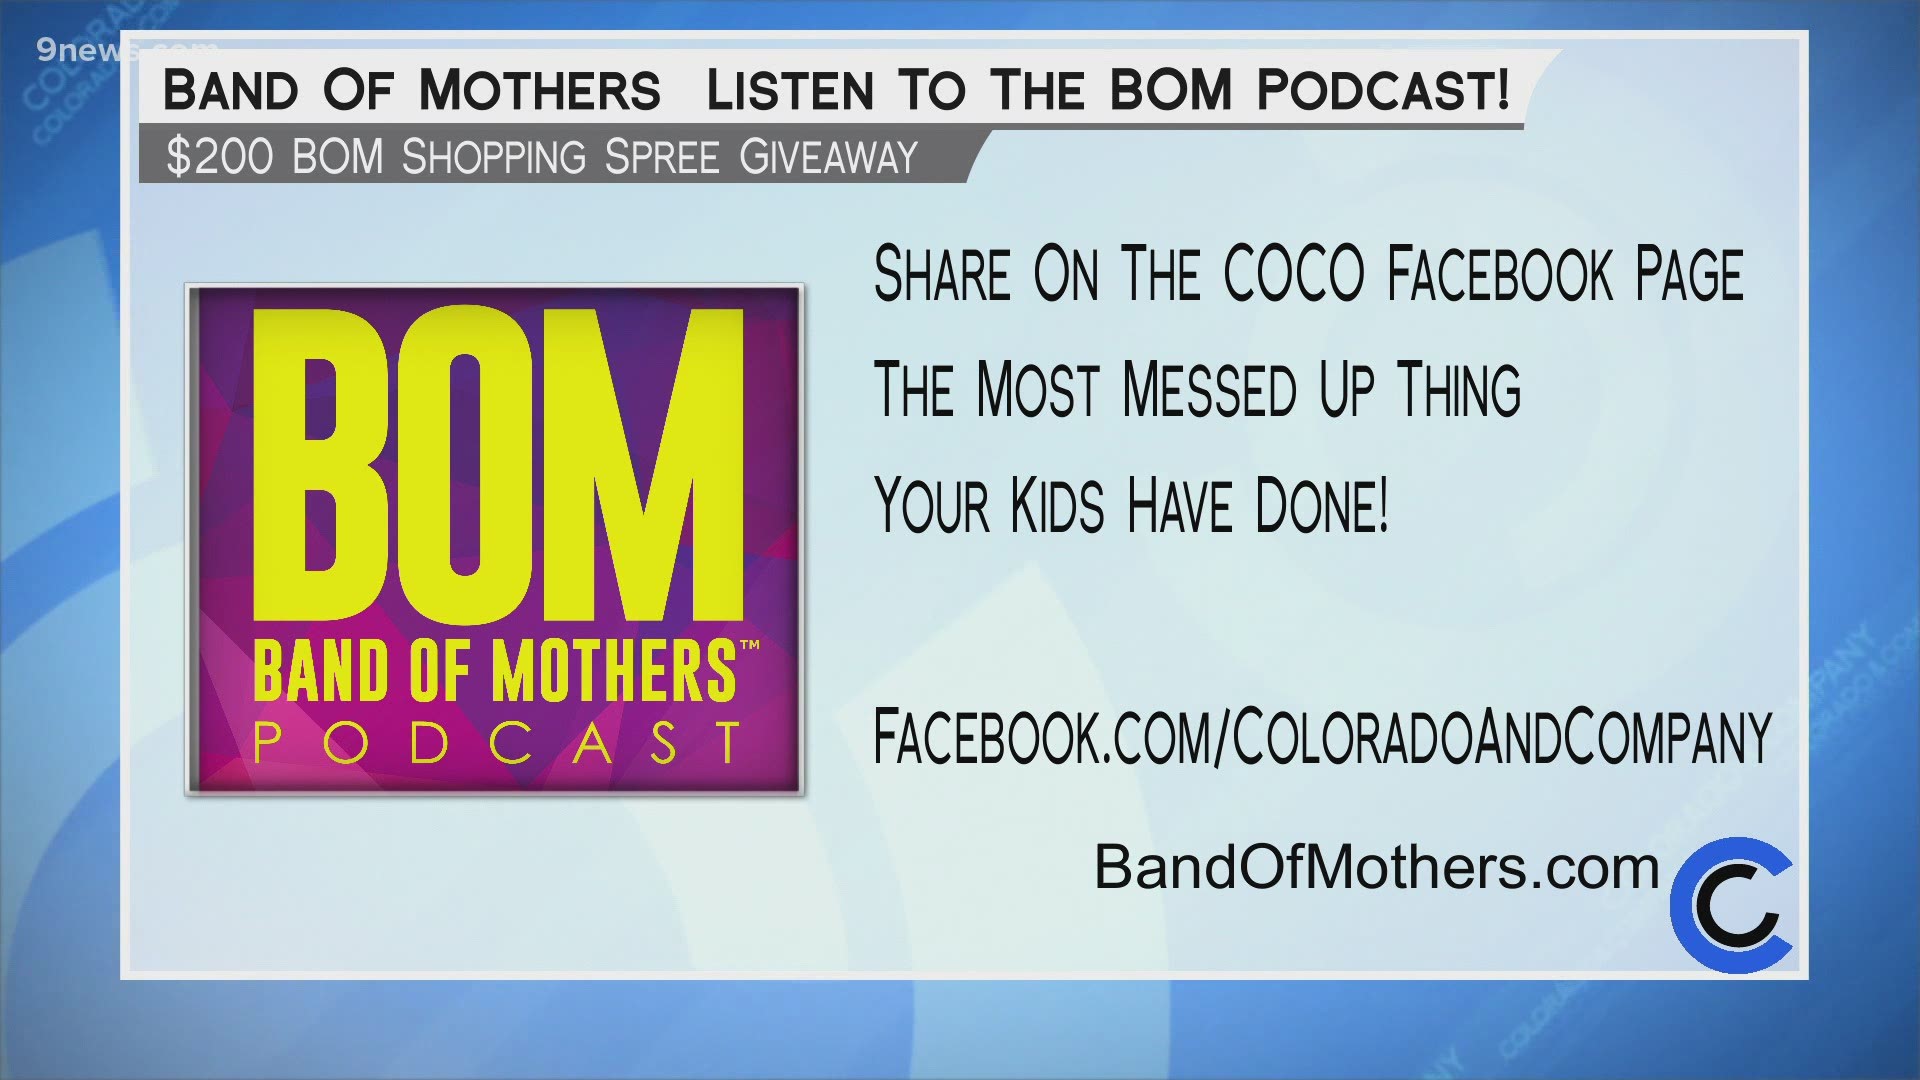 Join Tracey and Shay for their Band of Mothers Podcast at BandOfMothers.com.